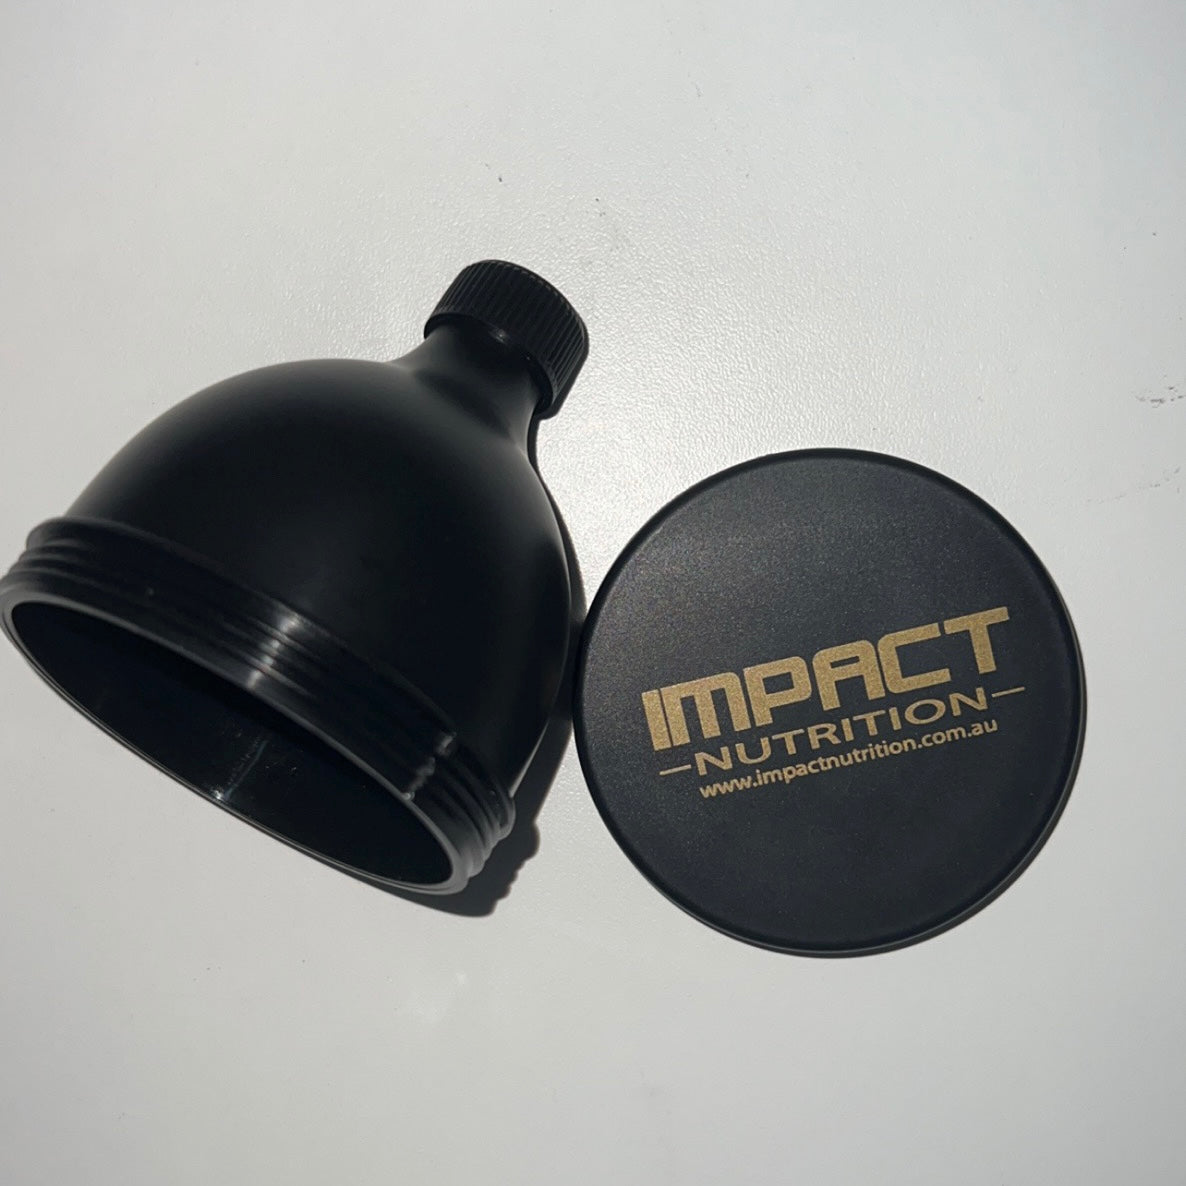 IMPACT NUTRITION - SUPP FUNNEL